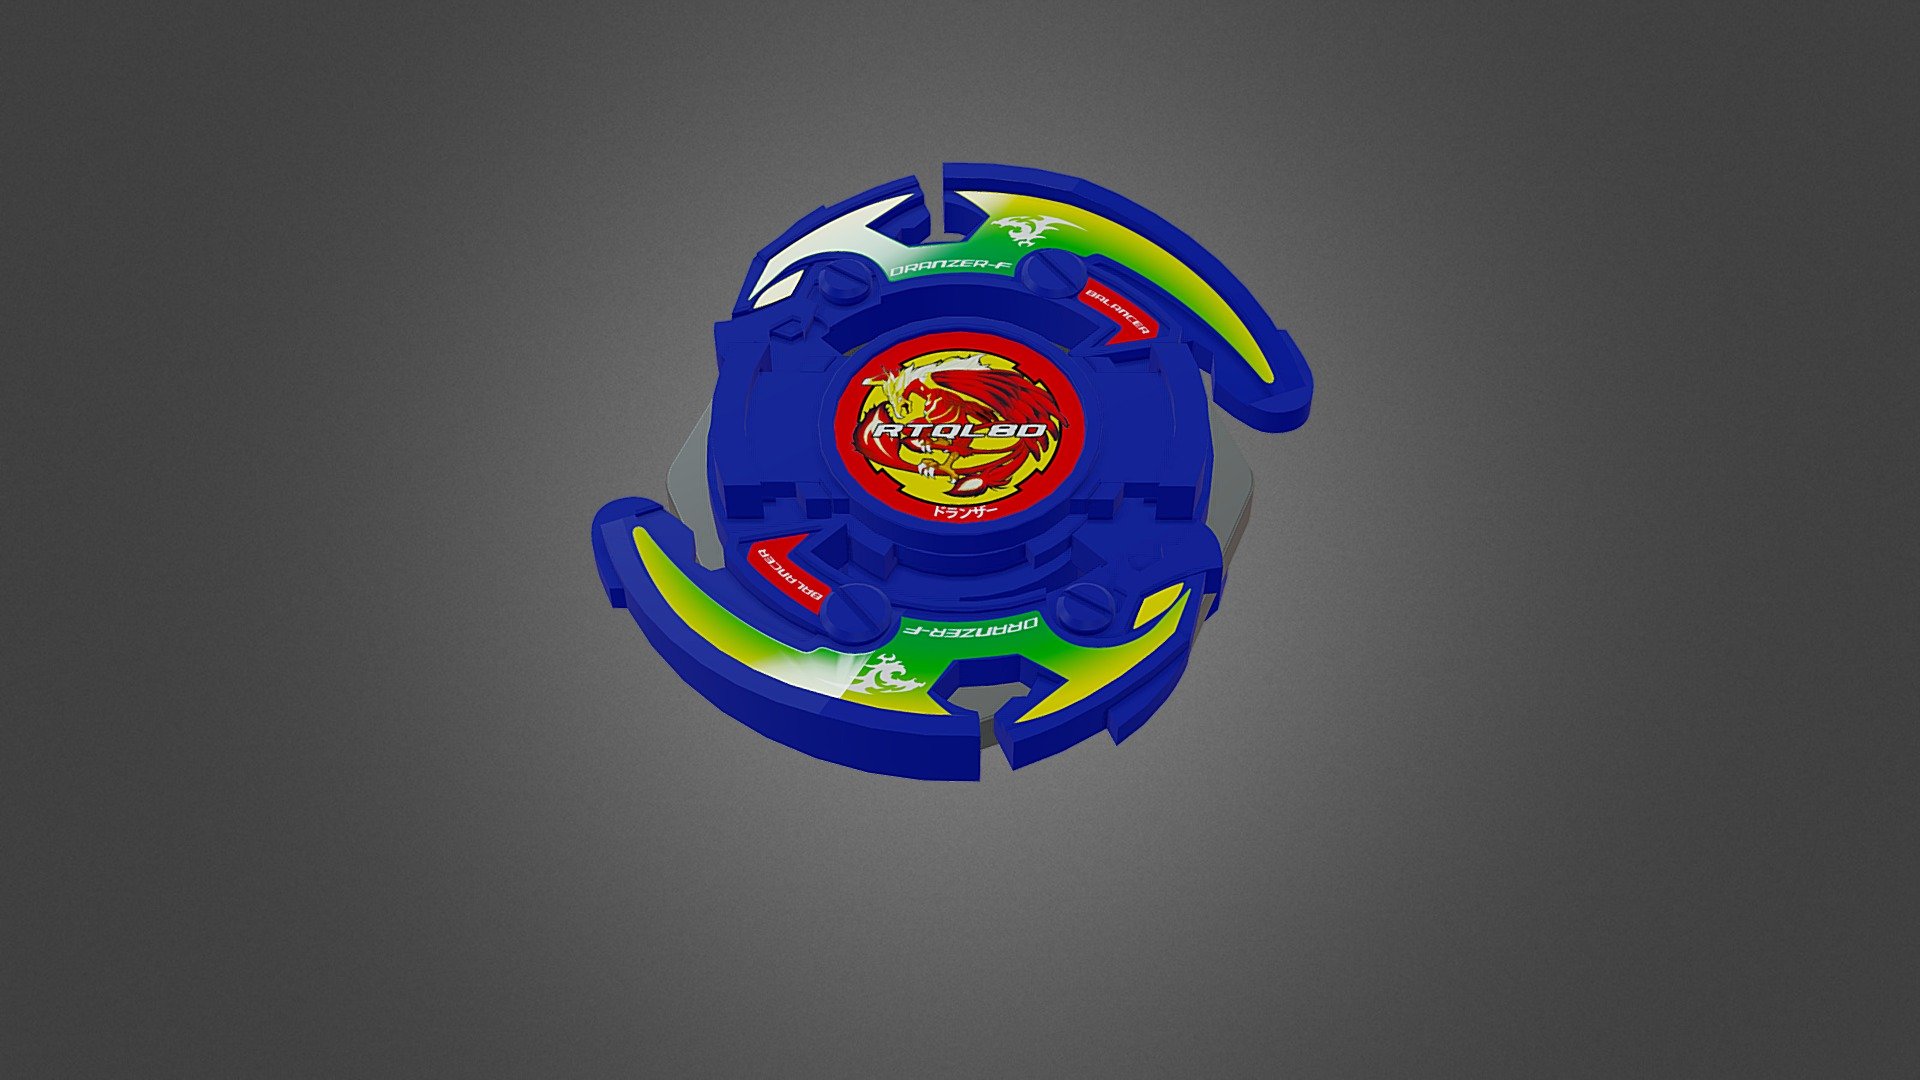 Kai's Beyblade from Season 1. Preceded by Dranzer S. Modelled in Fusion 360. Referenced the official Takara toy with digital calipers for accurate dimensions. Stickers designed in Illustrator 3d model